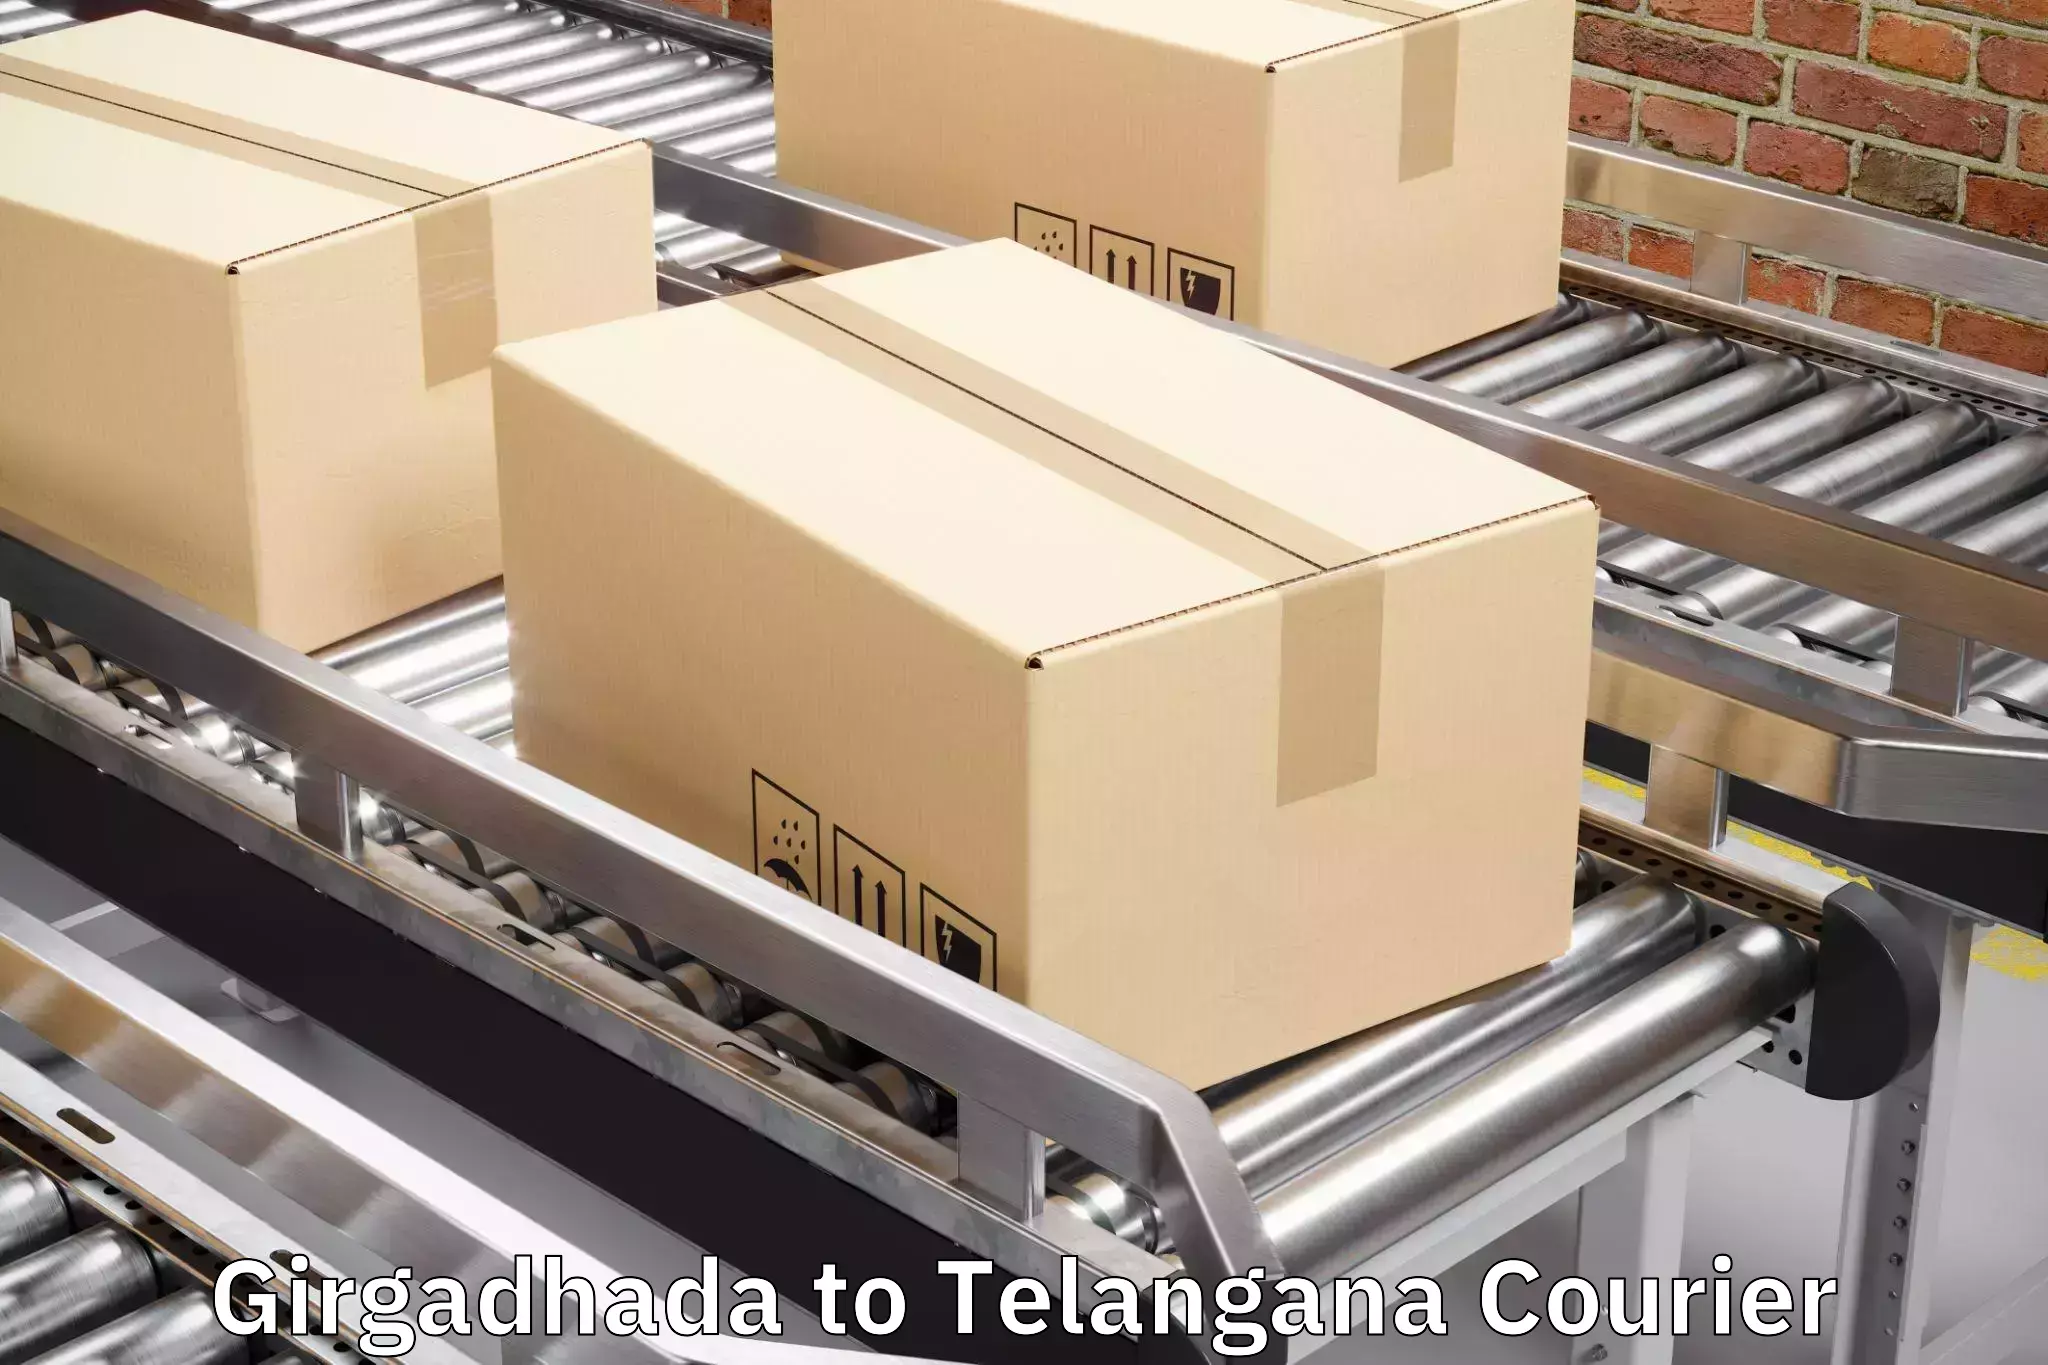 Baggage shipping quotes in Girgadhada to Sultanabad